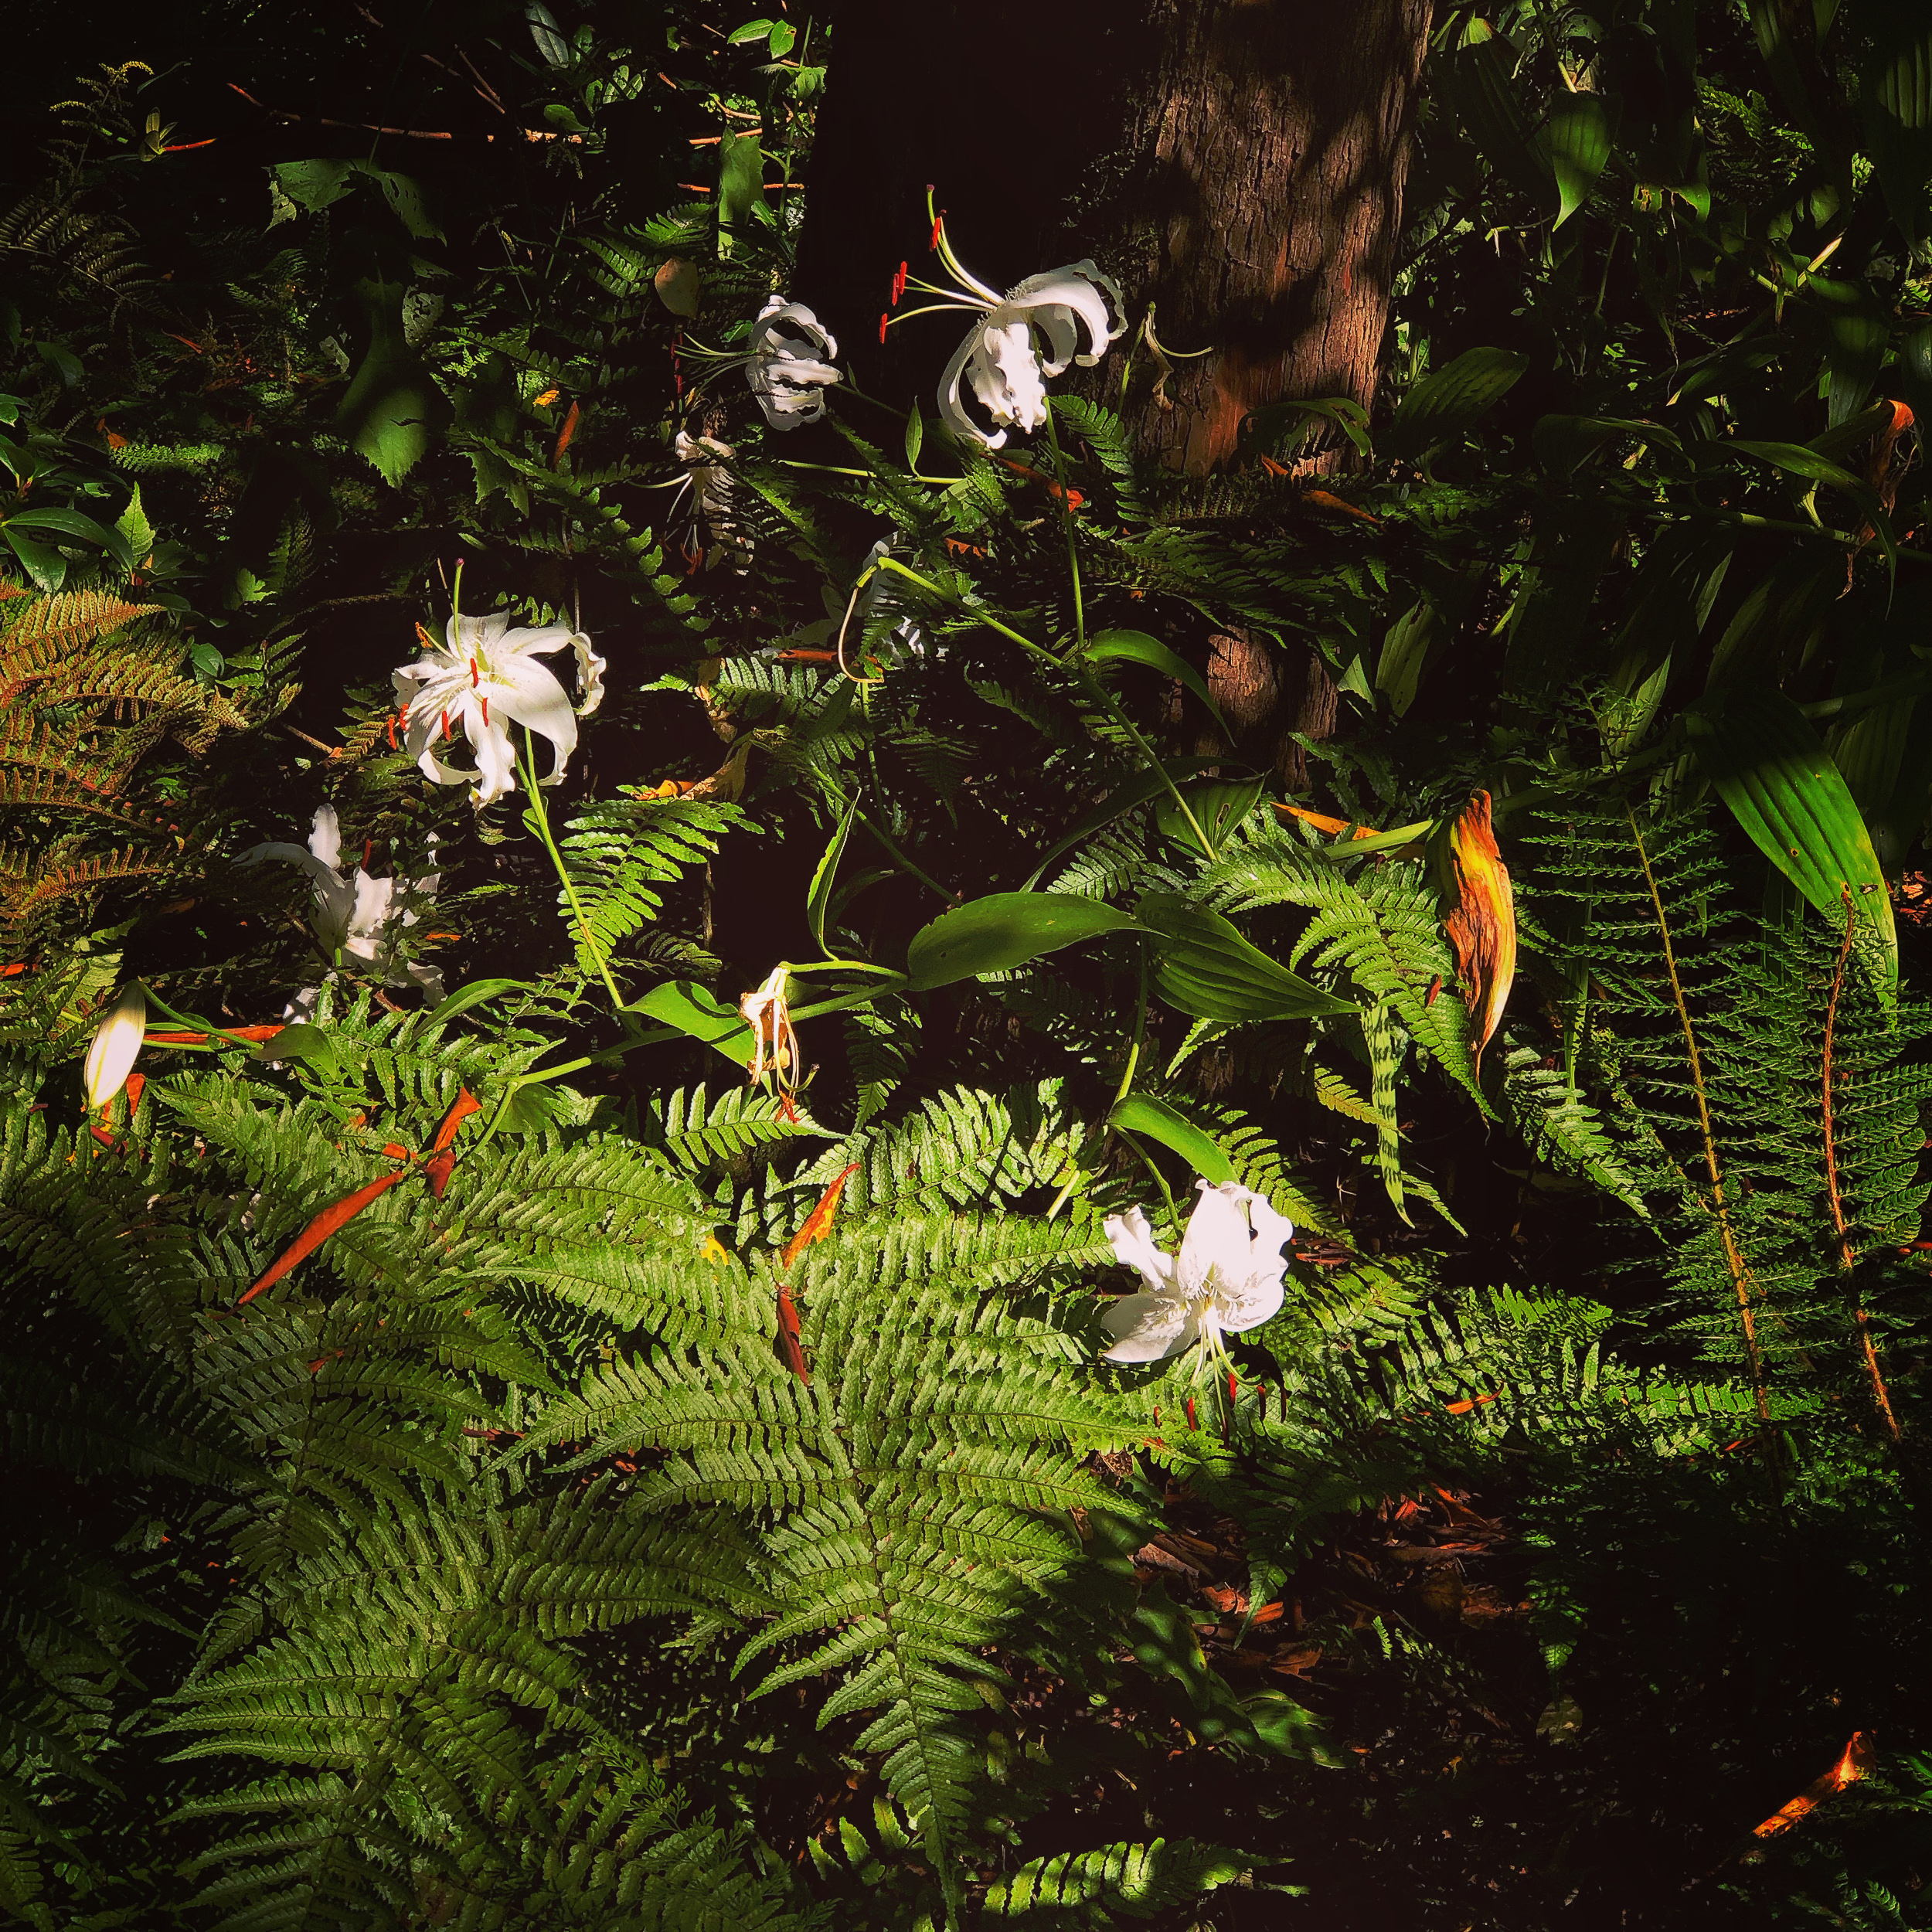 Ferns and lilies